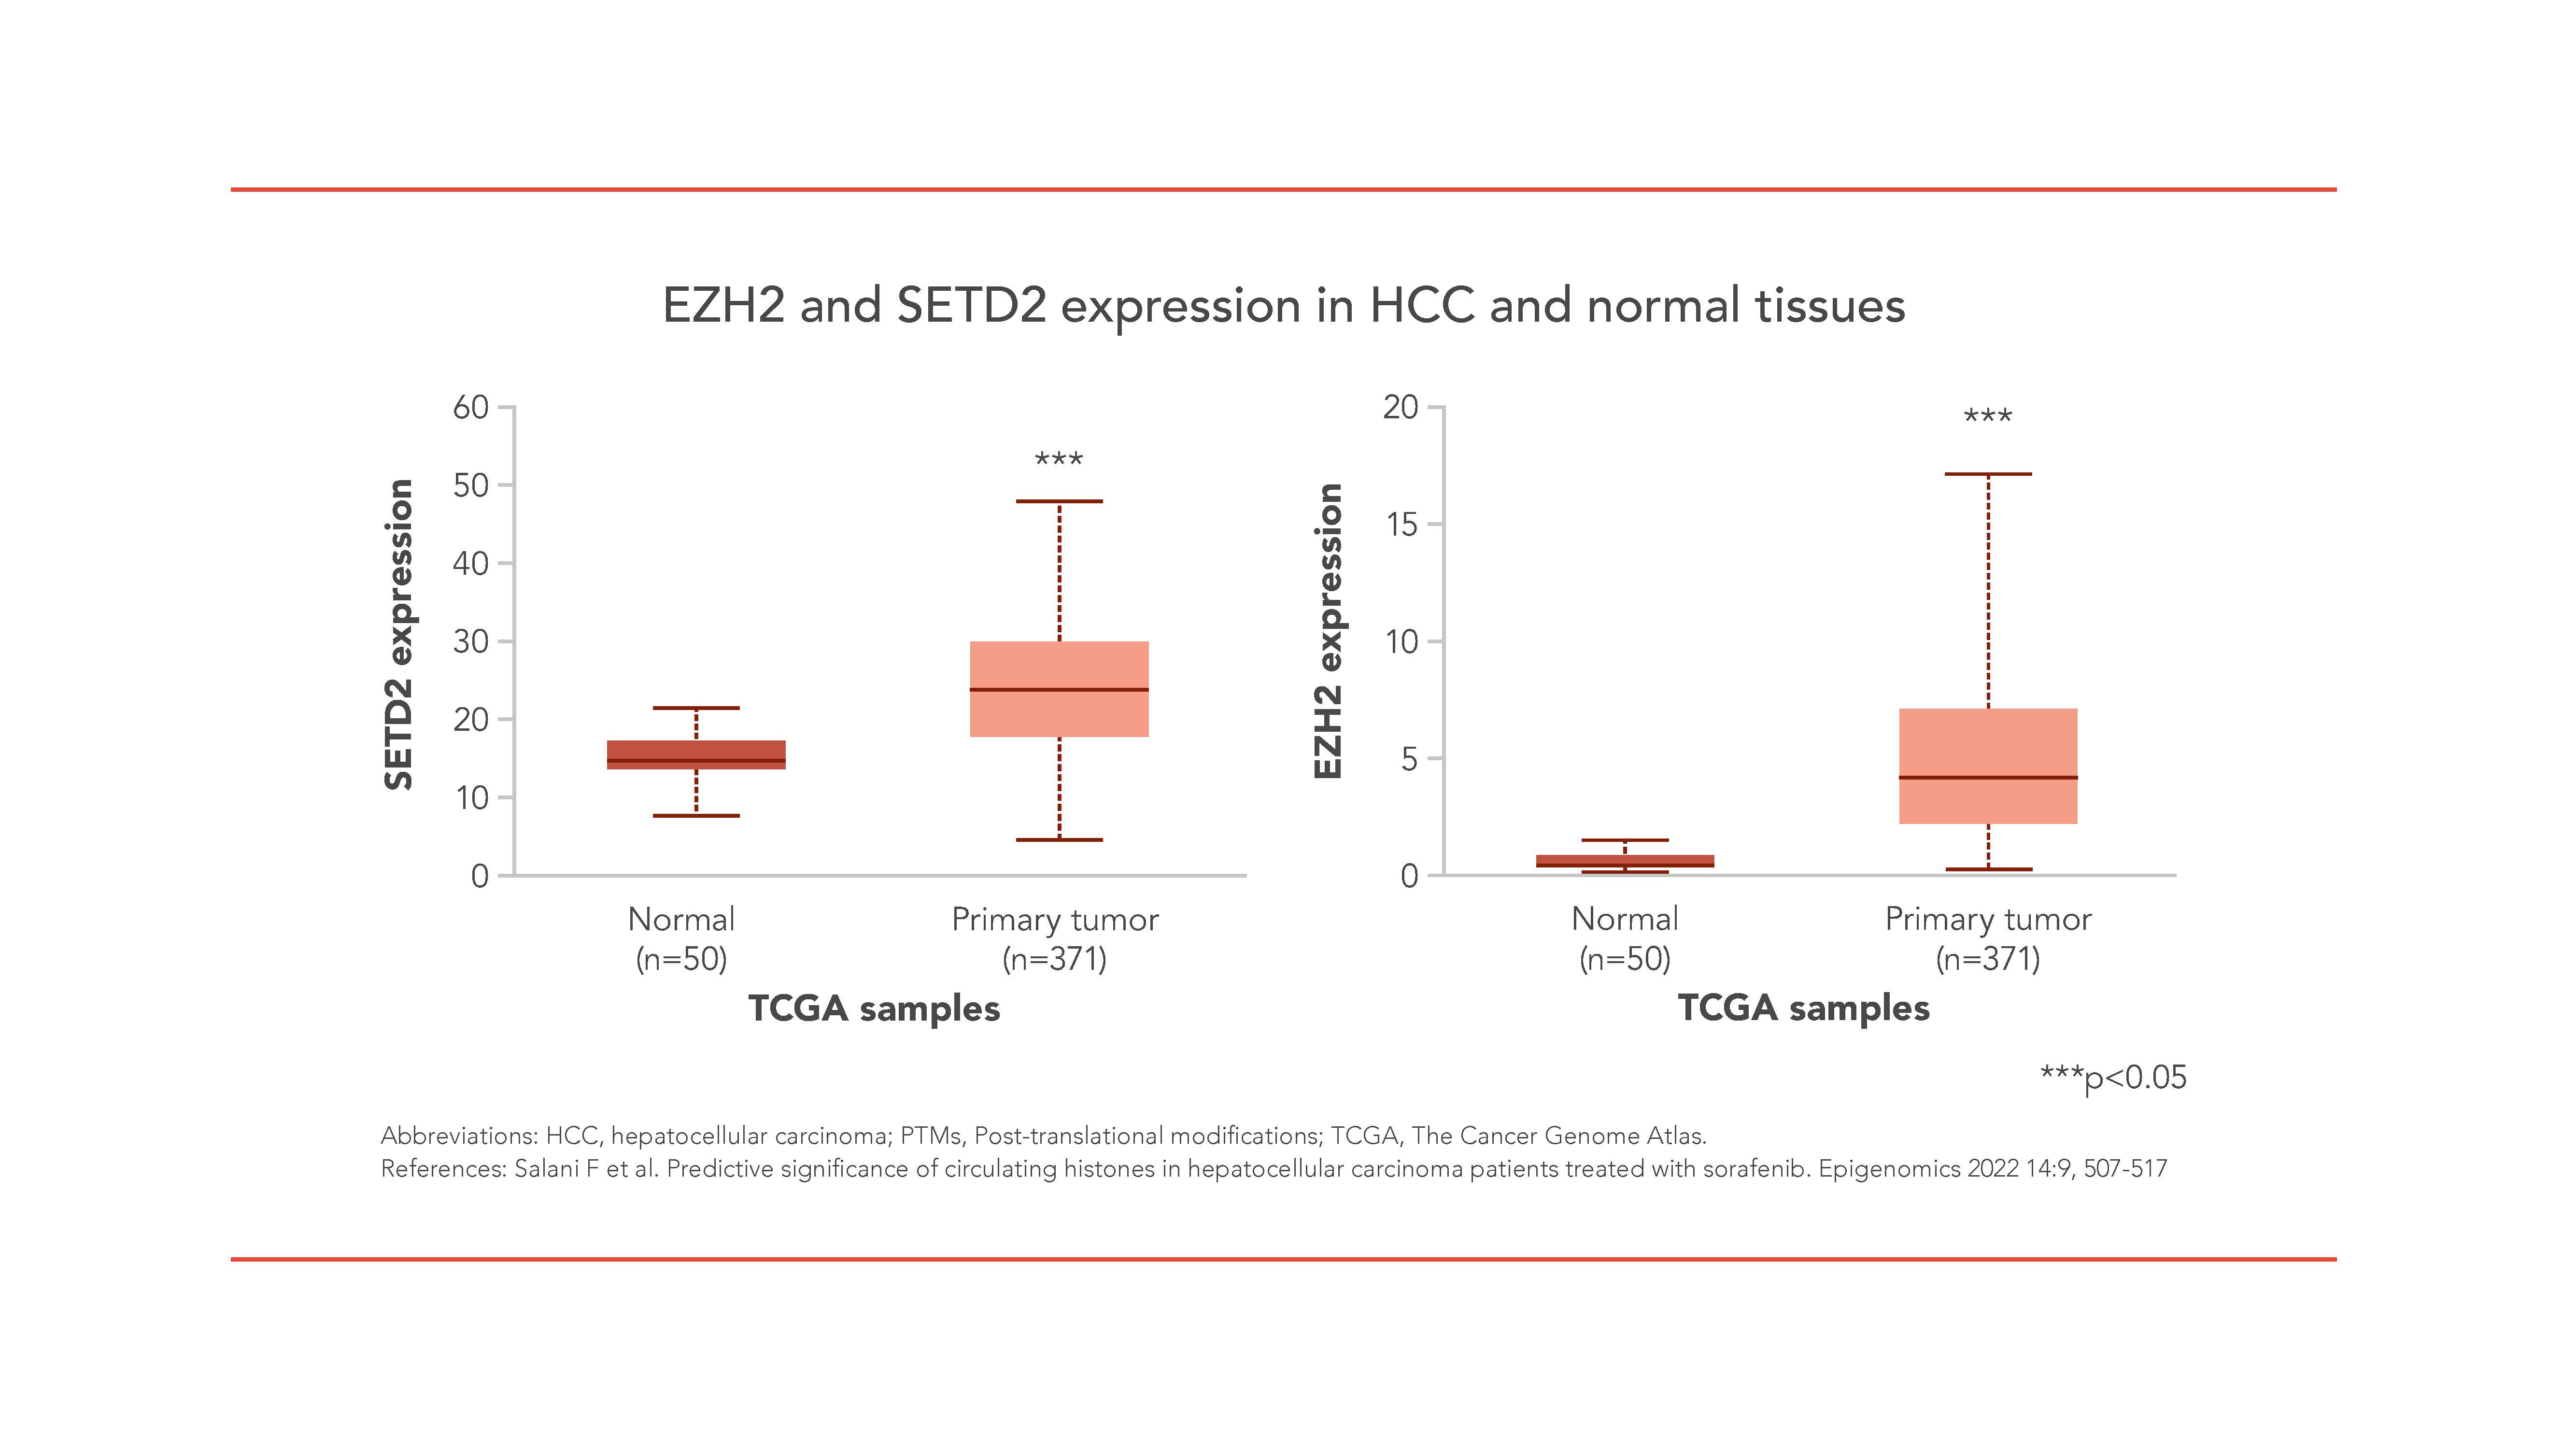 This image is a set of two box plots comparing the expression of EZH2 and SETD2 genes in normal tissue and primary tumor samples from hepatocellular carcinoma (HCC) patients. The left plot shows SETD2 expression levels, with the y-axis indicating expression and the x-axis indicating the sample type. Normal tissue samples (n=50) show lower SETD2 expression compared to primary tumor samples (n=371), with a statistically significant difference denoted by three asterisks (p<0.05). The right plot shows EZH2 expression levels, also displaying significantly higher expression in primary tumor samples compared to normal tissues, indicated by the same statistical significance marker. The data is sourced from TCGA (The Cancer Genome Atlas) samples. The abbreviation 'HCC' stands for hepatocellular carcinoma, and 'PTMs' for post-translational modifications. The reference provided is "Salani F et al. Predictive significance of circulating histones in hepatocellular carcinoma patients treated with sorafenib. Epigenomics 2022 14:9, 507-517". The red color theme and the simplicity of the plots suggest it's designed for a clear presentation of the comparative expression data.